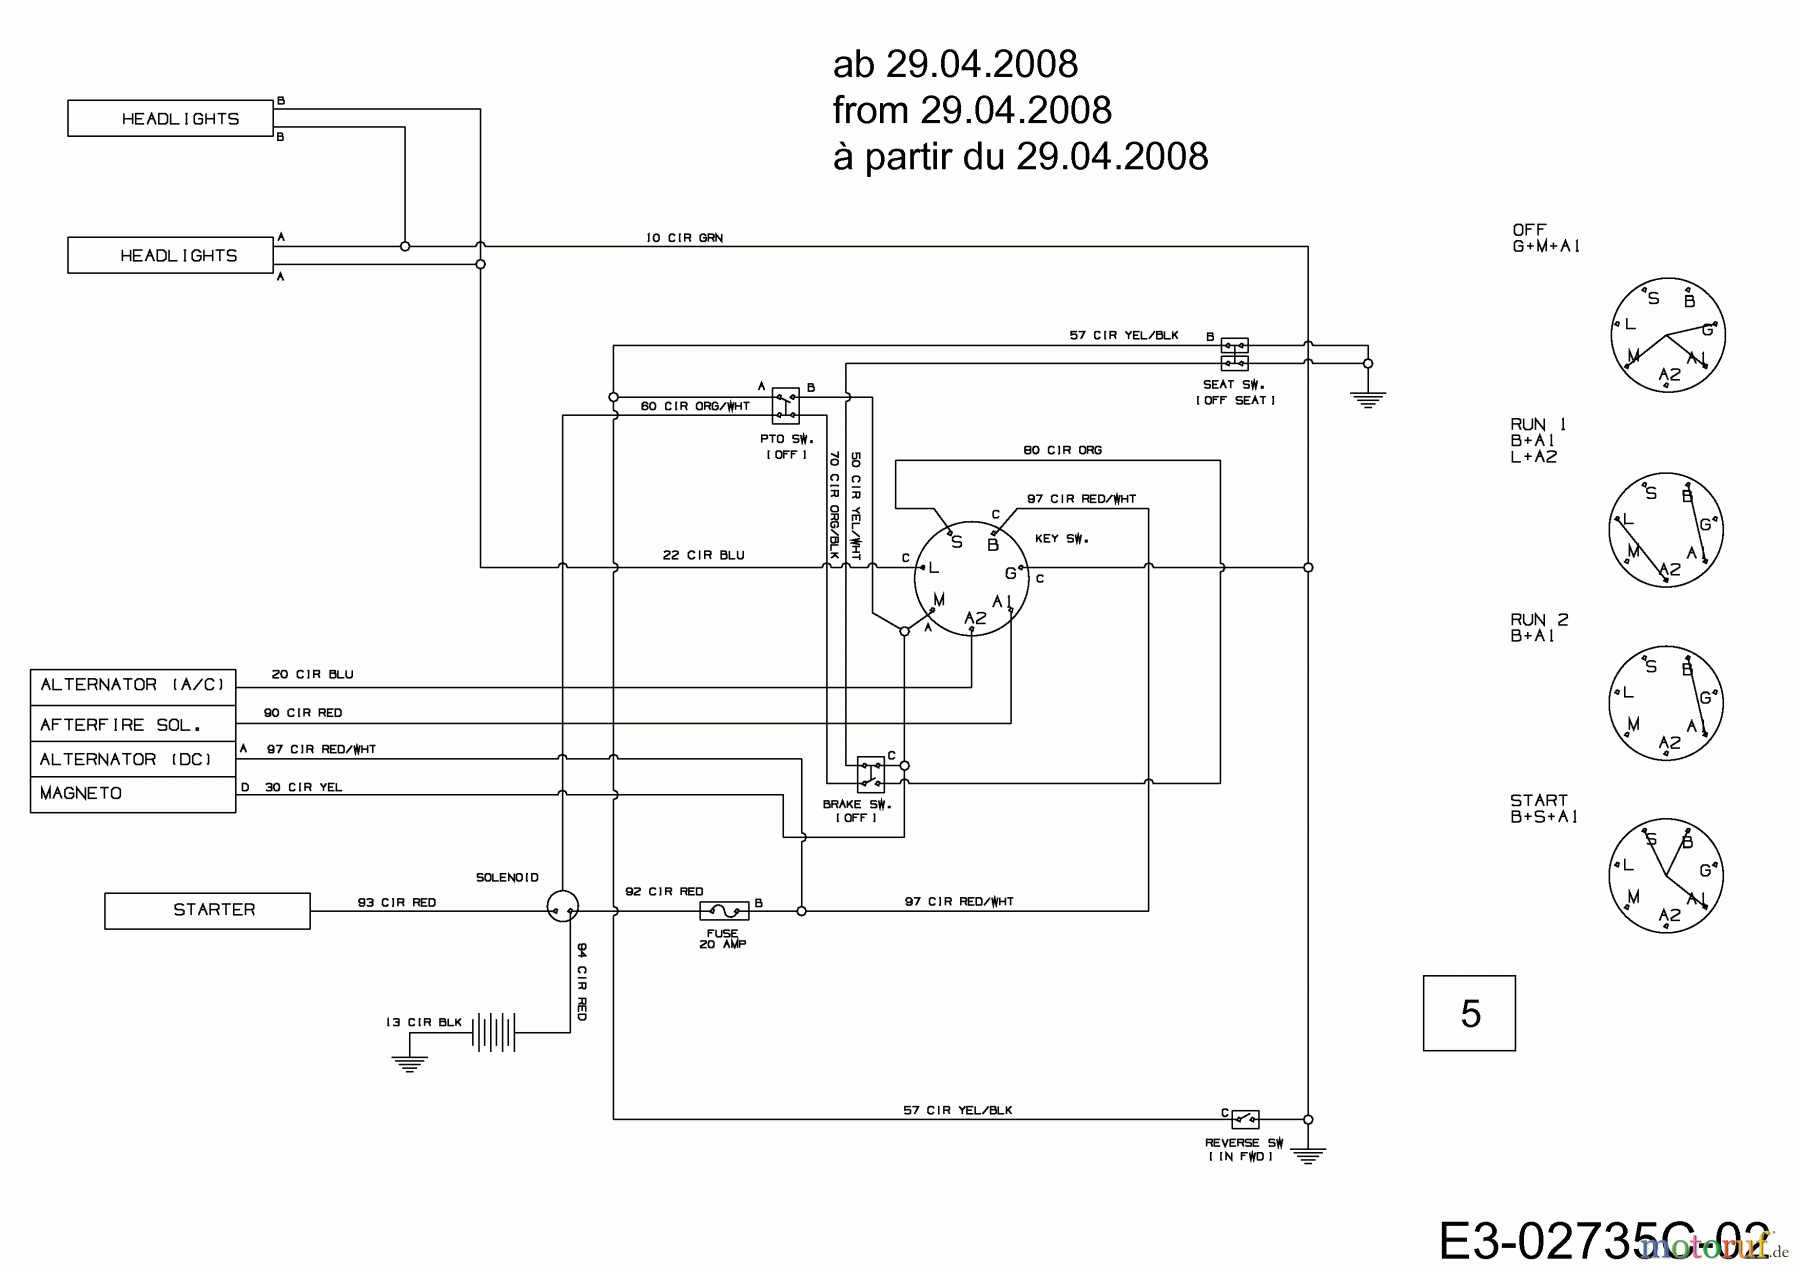  MTD Lawn tractors RS 180/107 13AT798G676  (2008) Wiring diagram from 29.04.2008